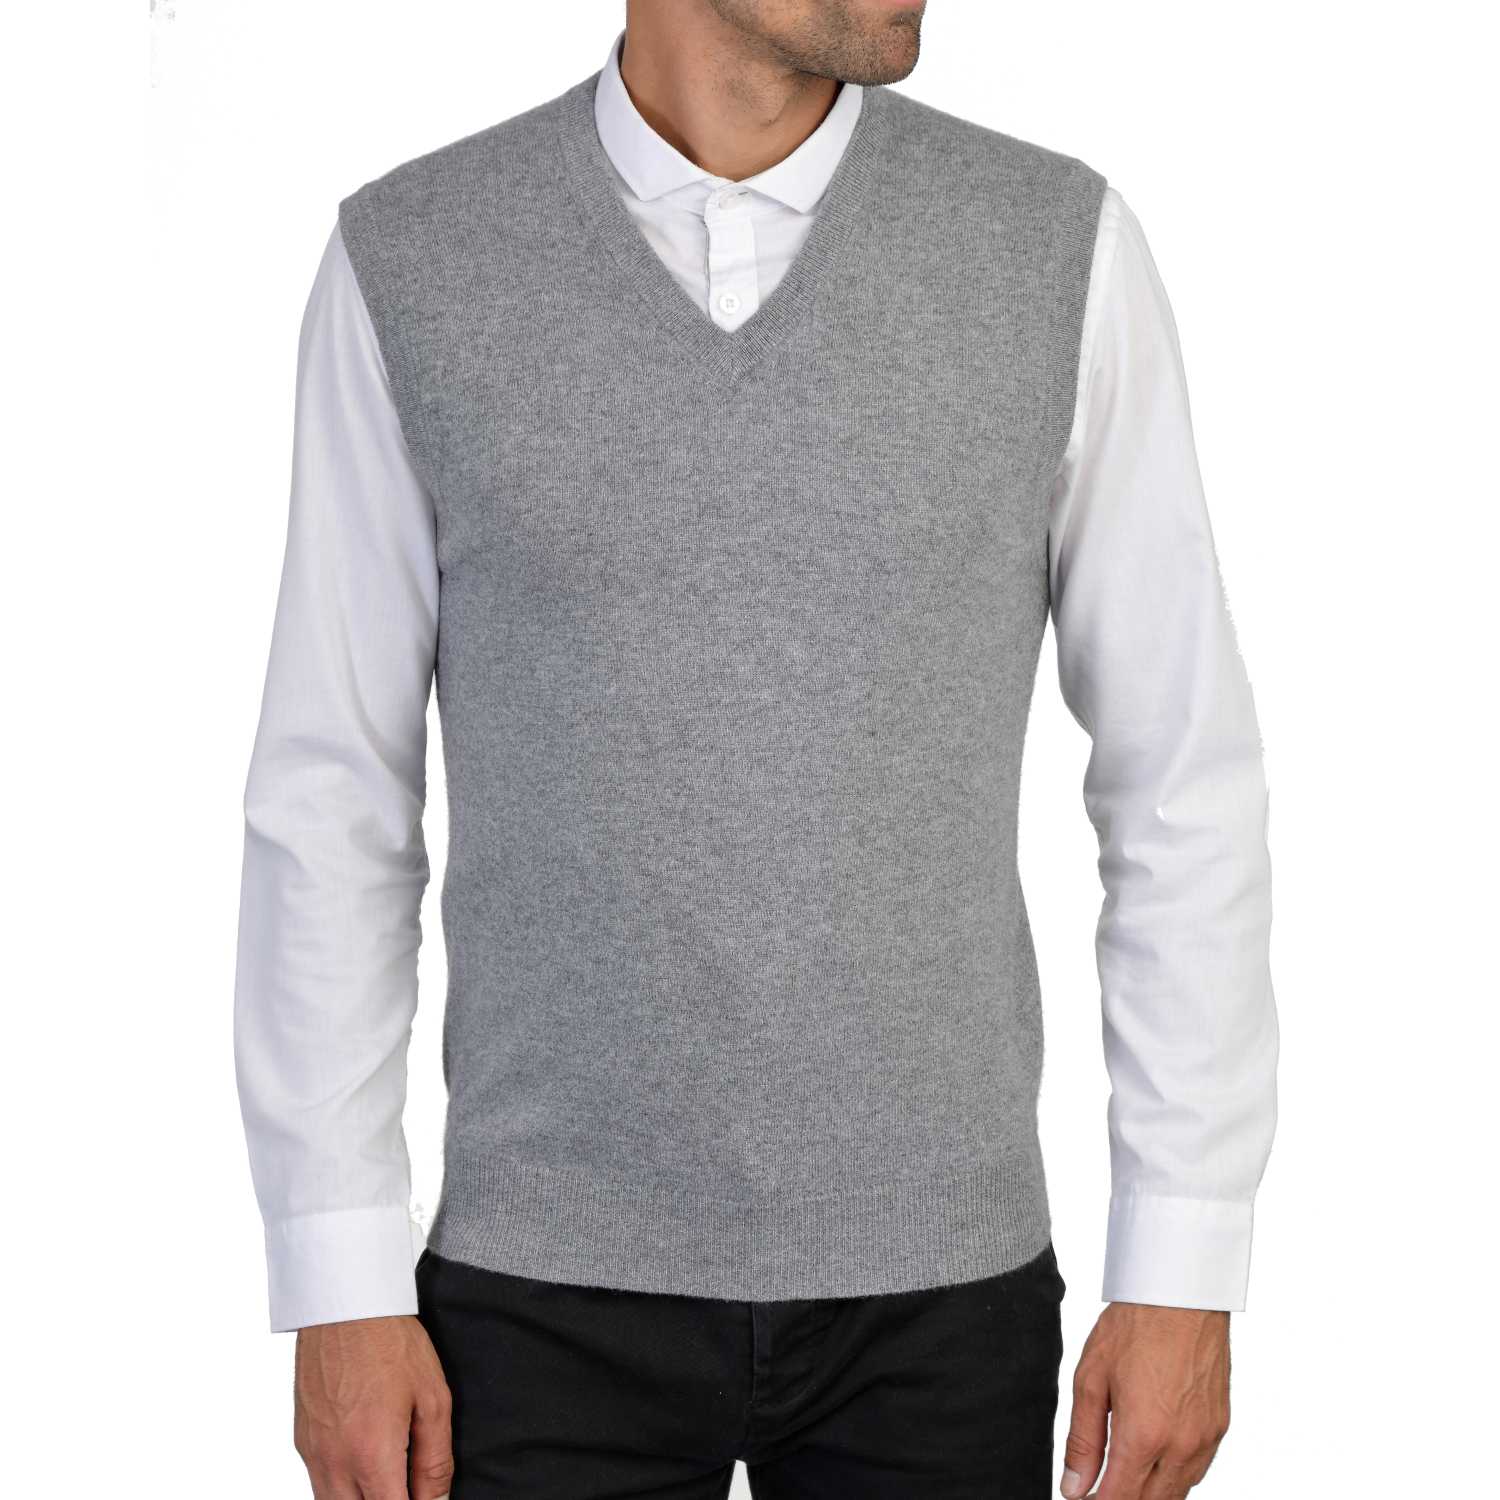 Mens Cashmere Sleeveless Sweater Vest - The Cashmere Choice